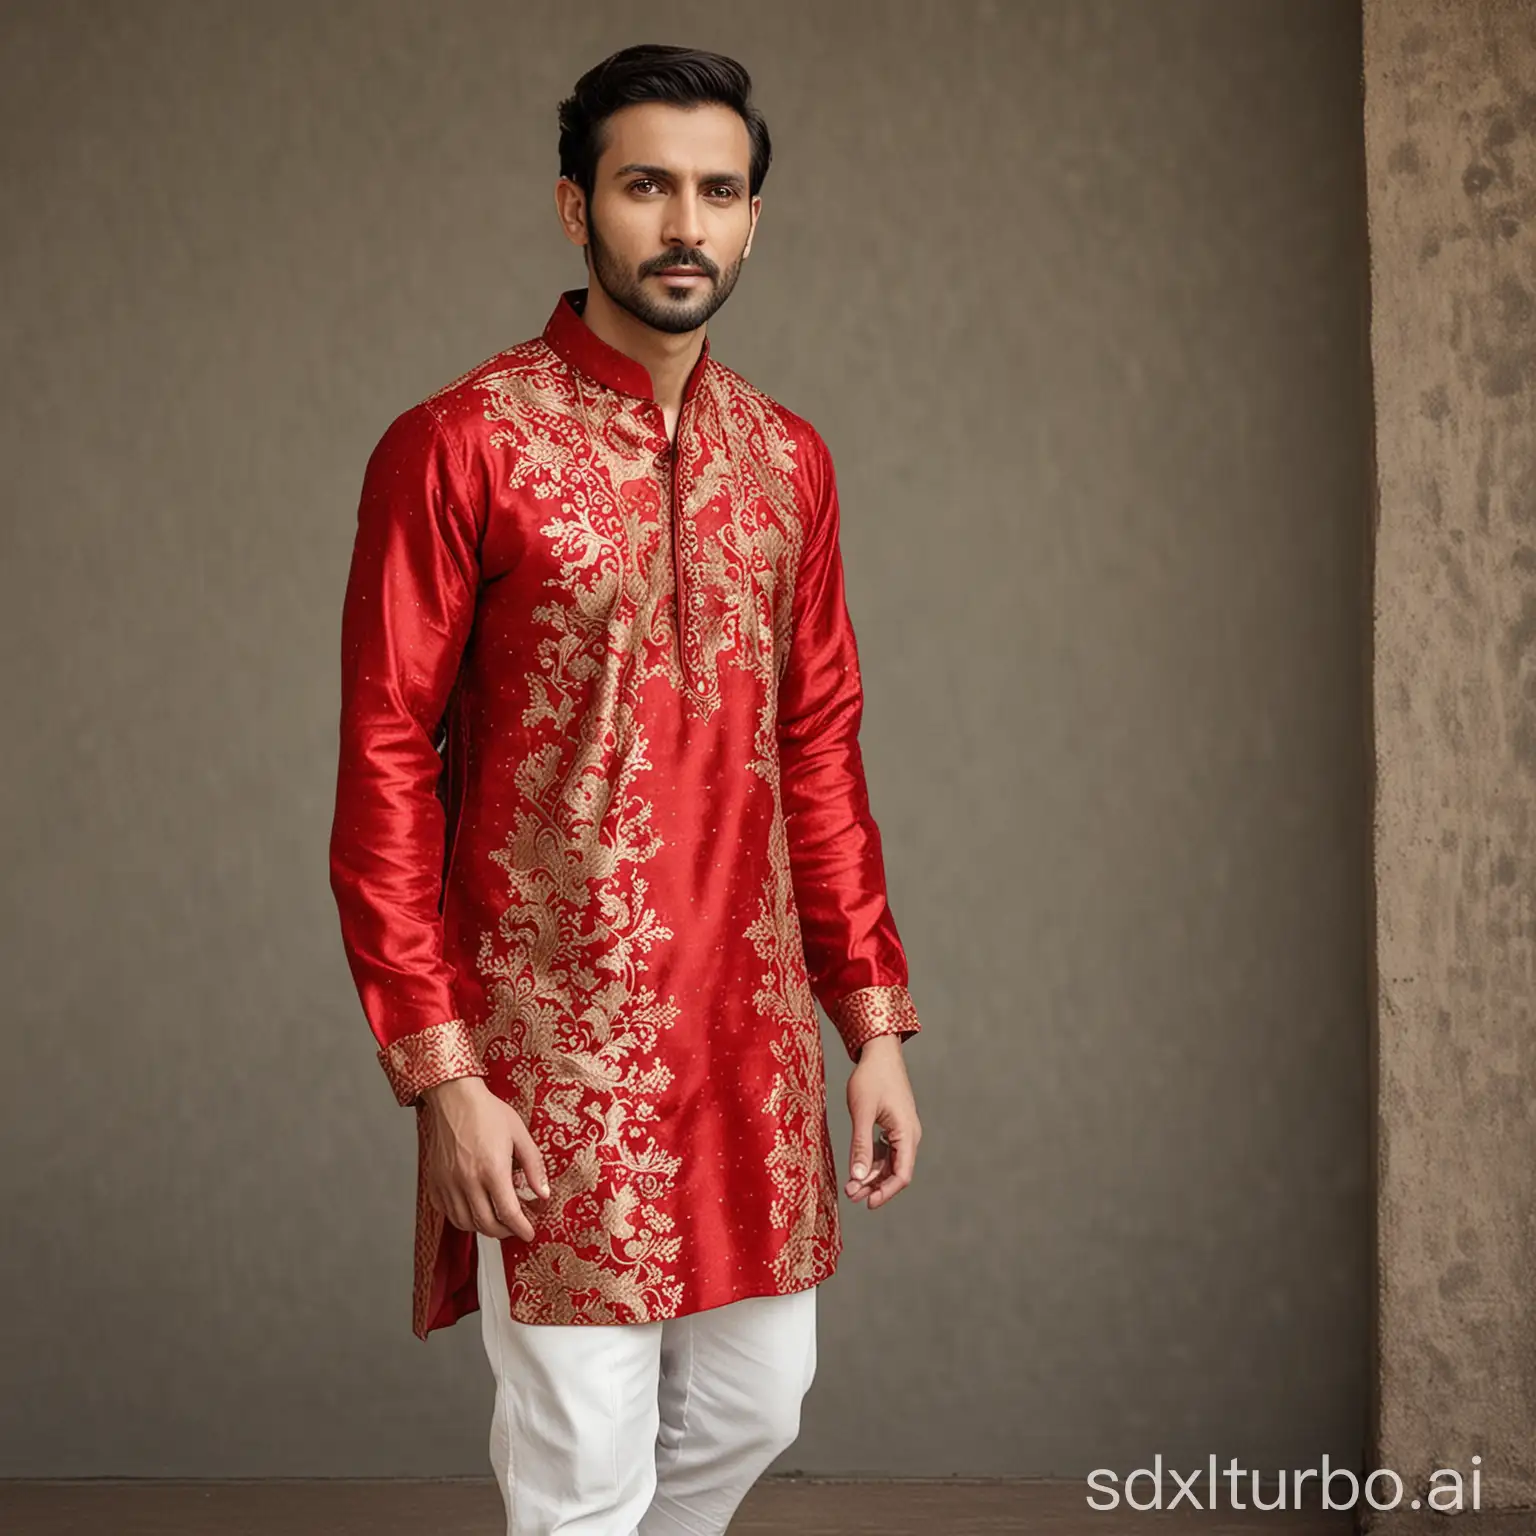 Fashionable-Man-in-Red-Shirt-and-White-Pants-with-Brocade-Dress-and-Kurta